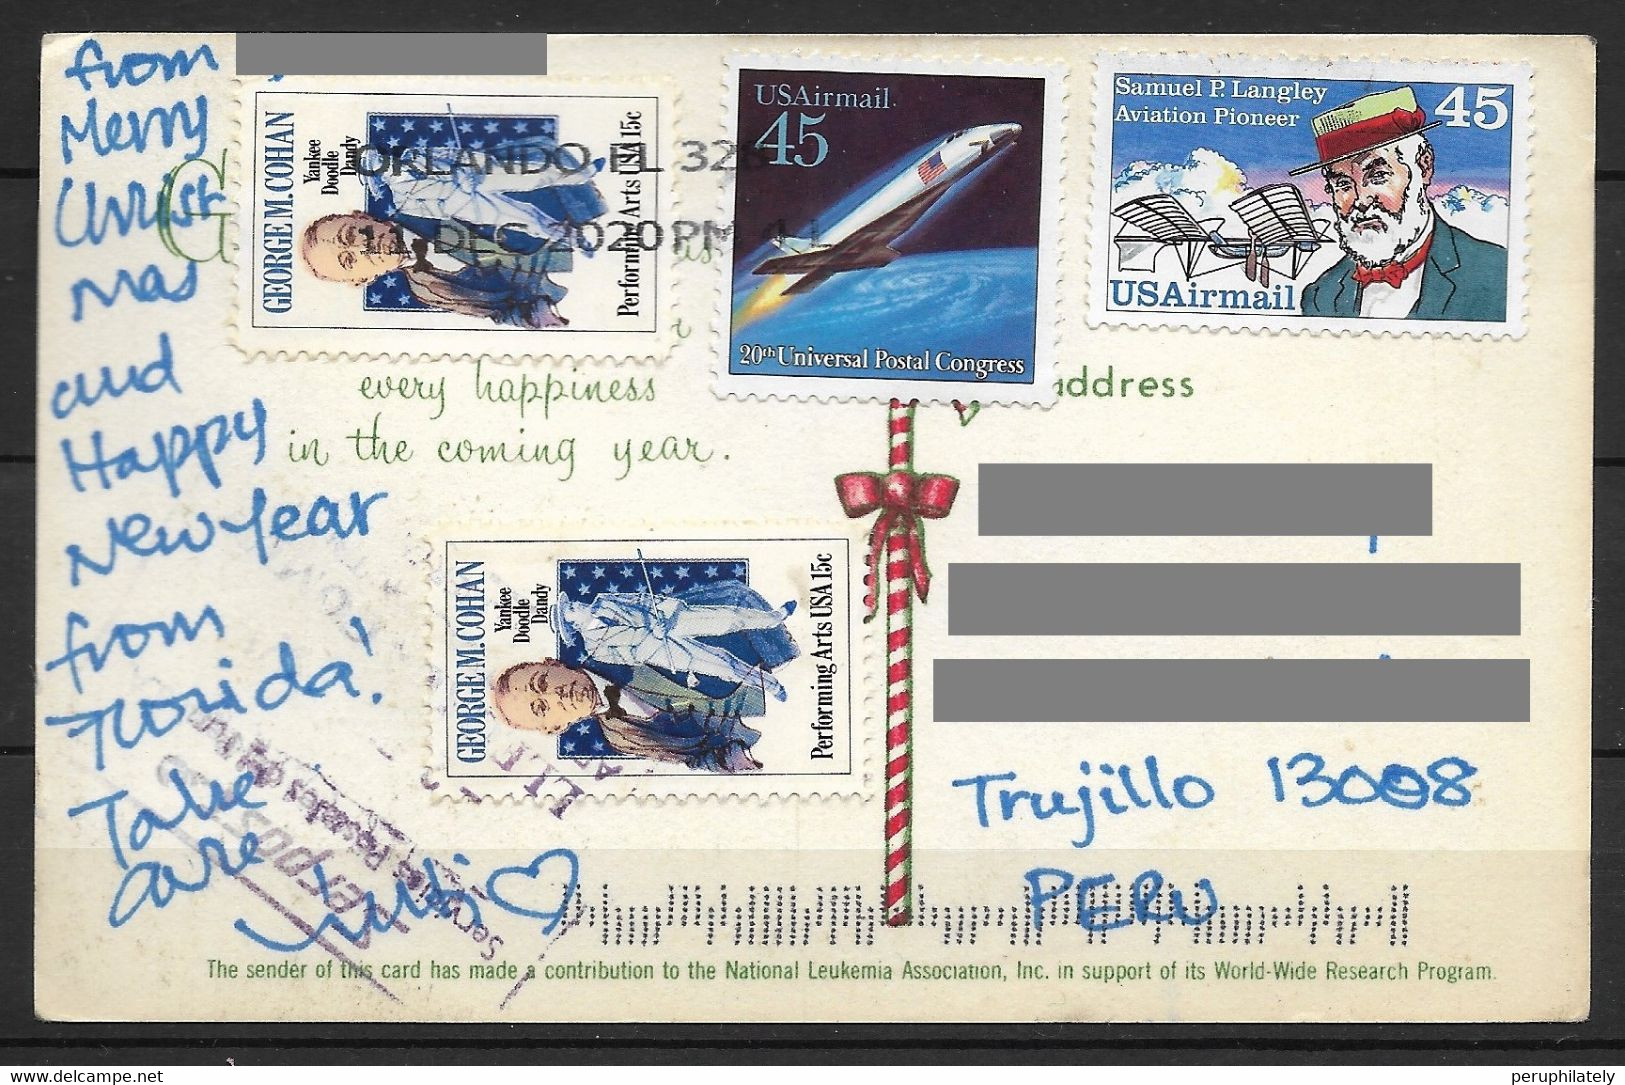 USA POSTCARD WITH AVIATION , SPACE SHUTTLE &  MOVIE STAMPS SENT TO PERU - Souvenirkaarten